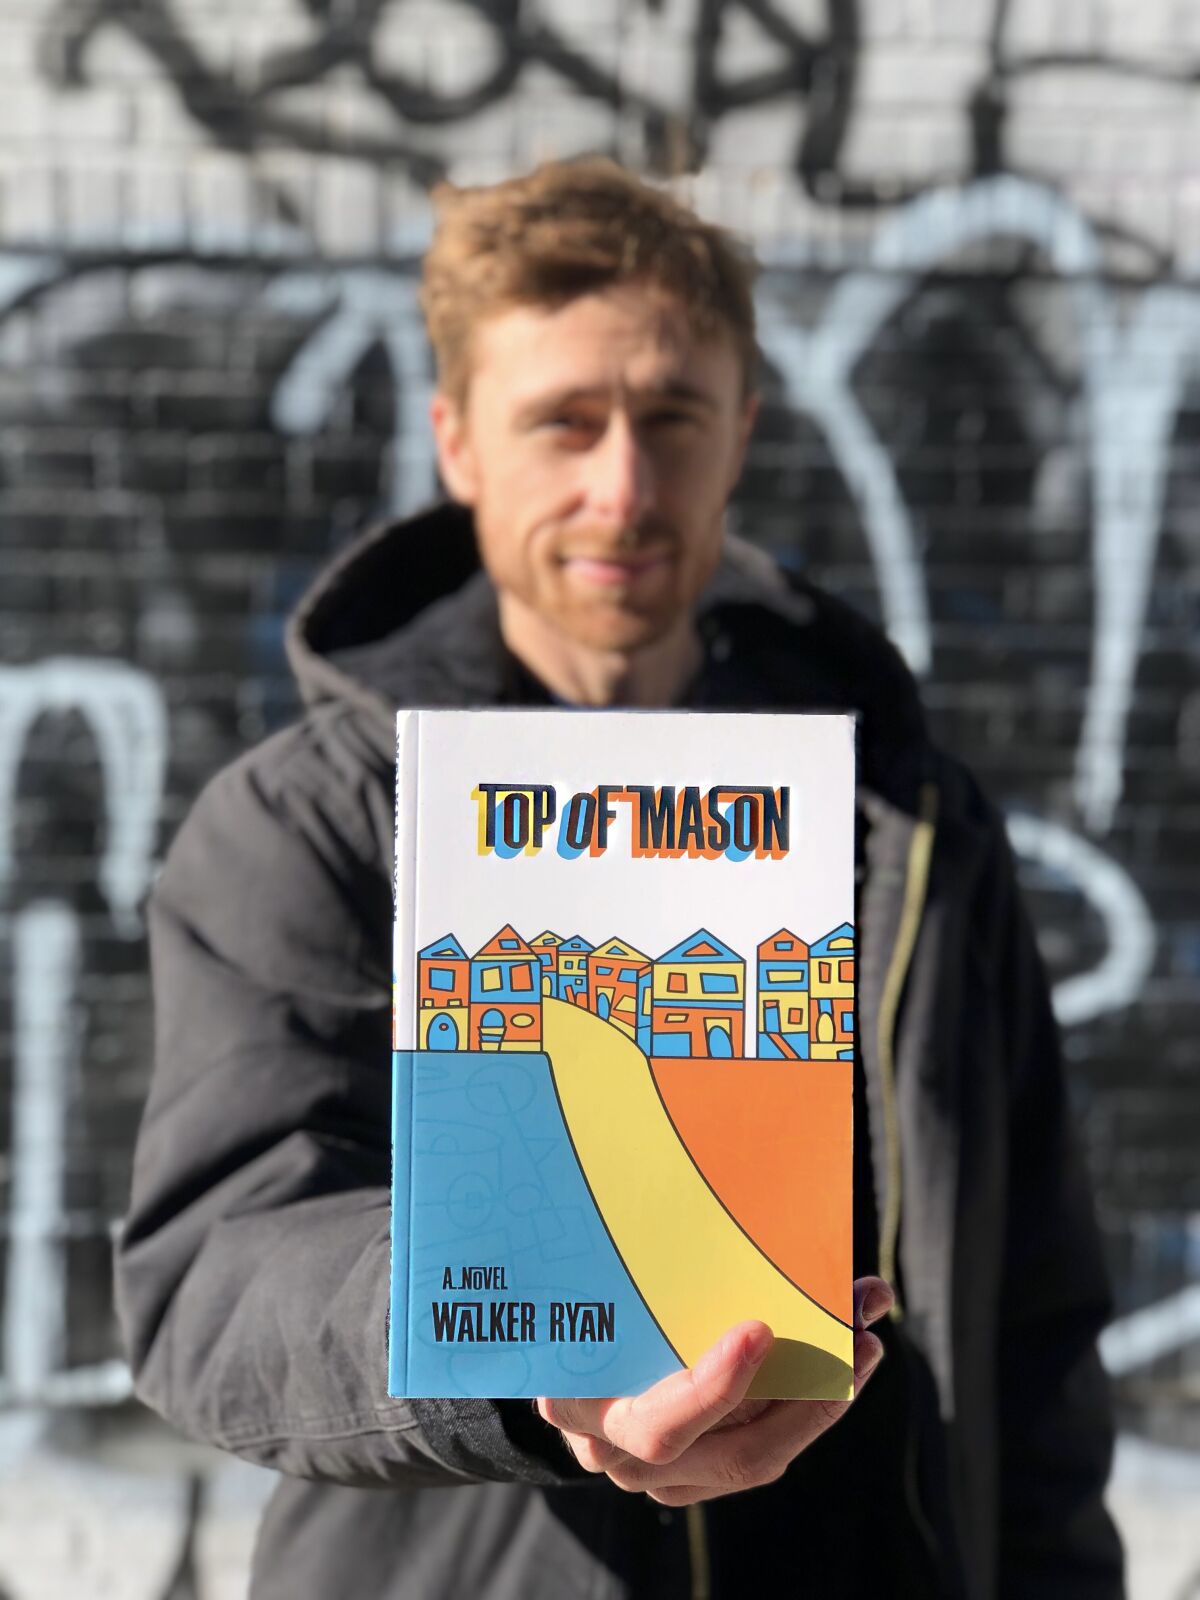 Walker Ryan with his first novel, "Top of Mason."